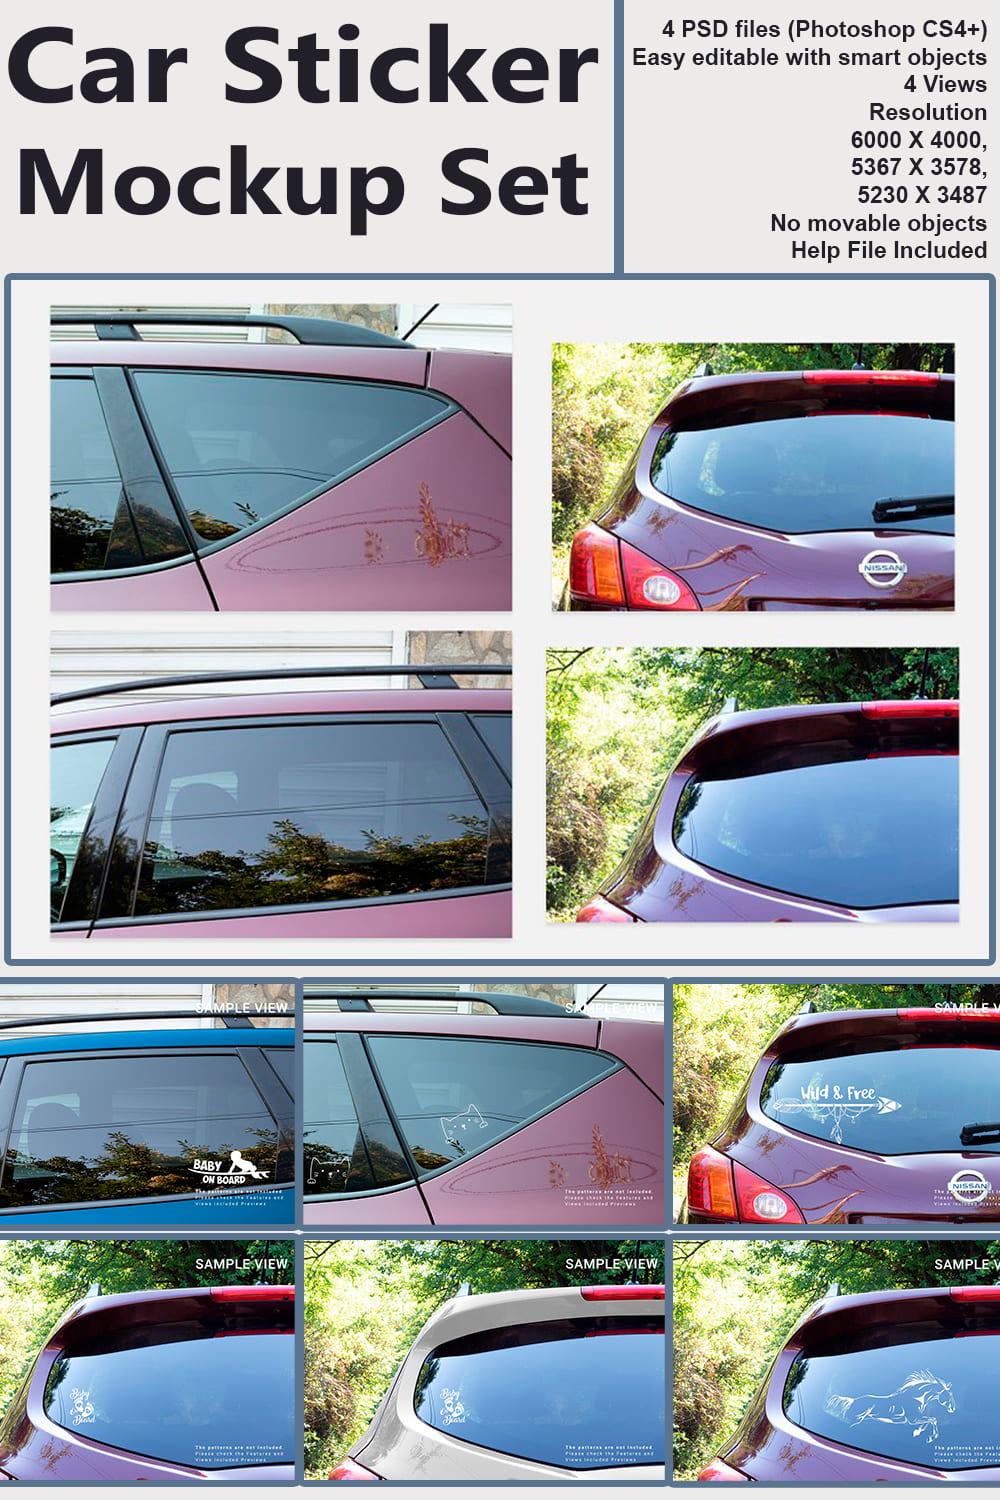 Set of cars photos with colorful stickers.